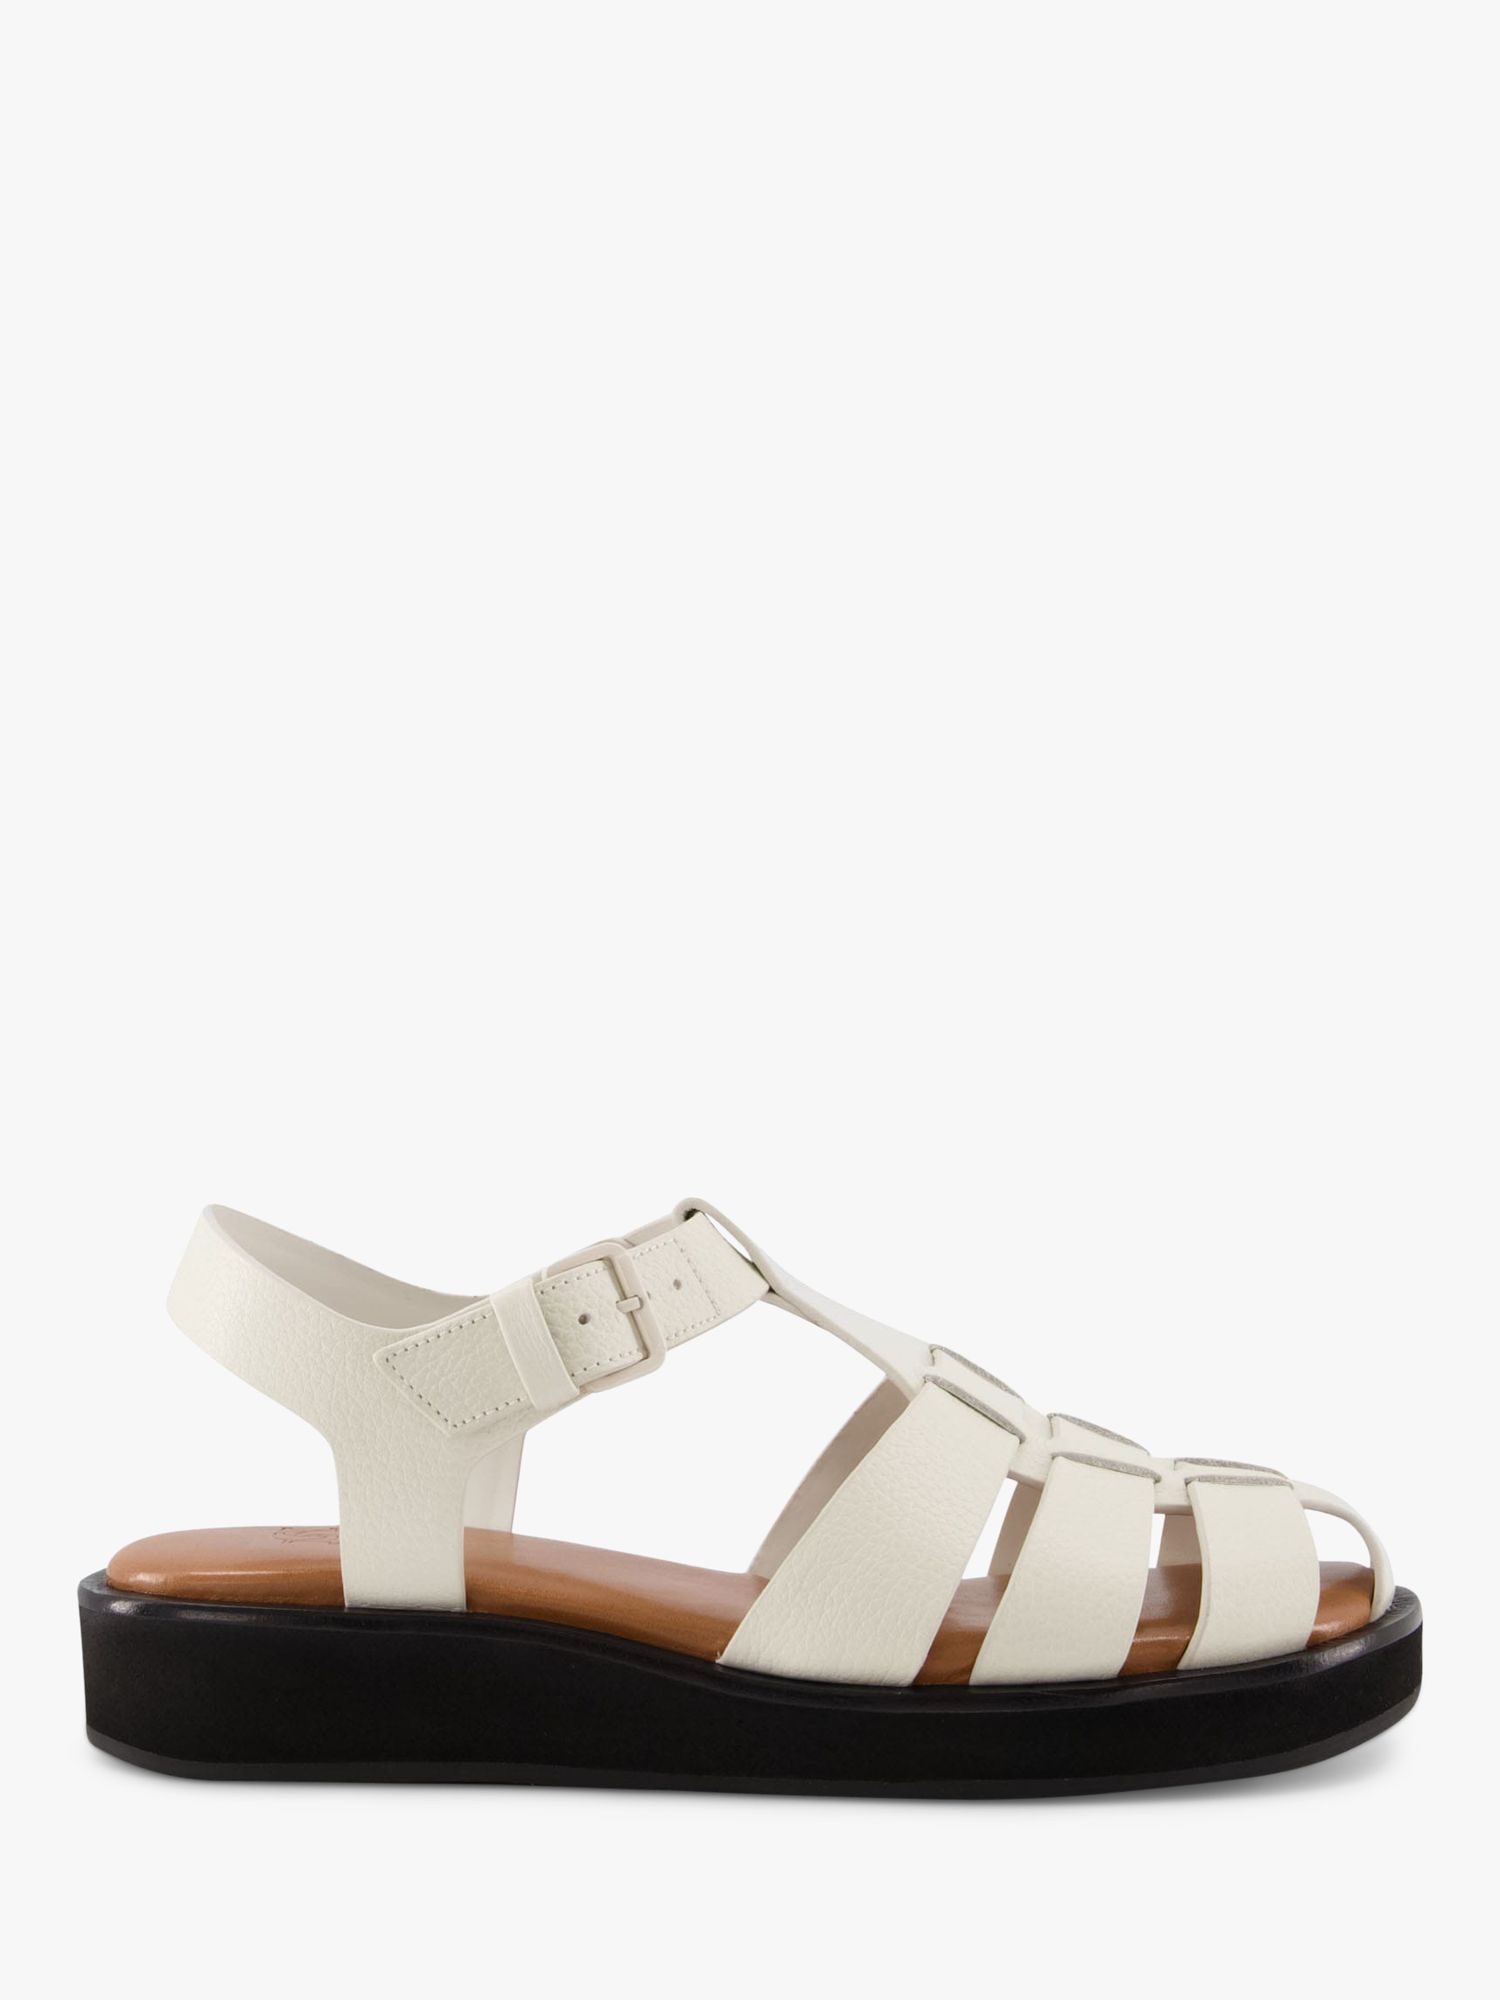 Dune Loch Leather Footbed Buckle Sandals, Ecru at John Lewis & Partners